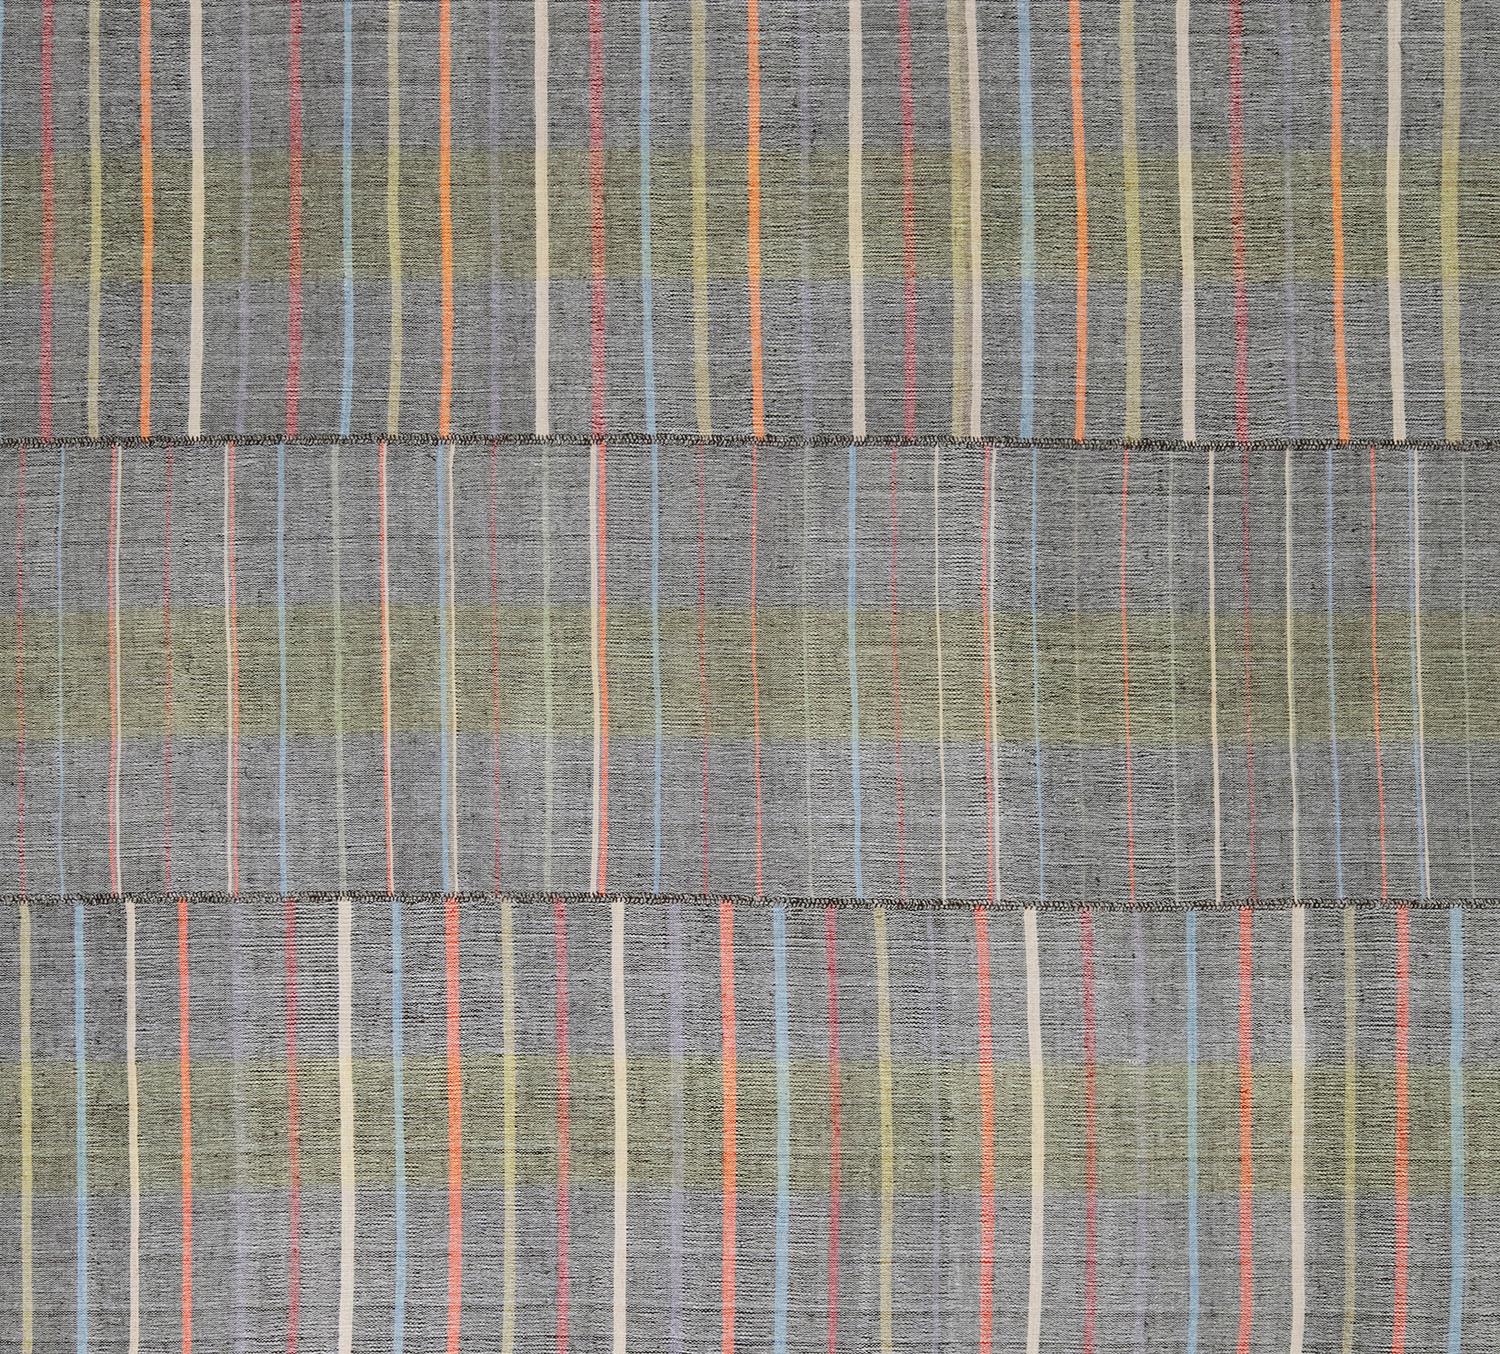 This beautiful grey with multicolor accented striped flatweave rug is made with handspun wool and cotton and natural dyes. It is inspired by the antique kilims that are native to the Kurdish region in Iran. NASIRI continues their rich tradition of